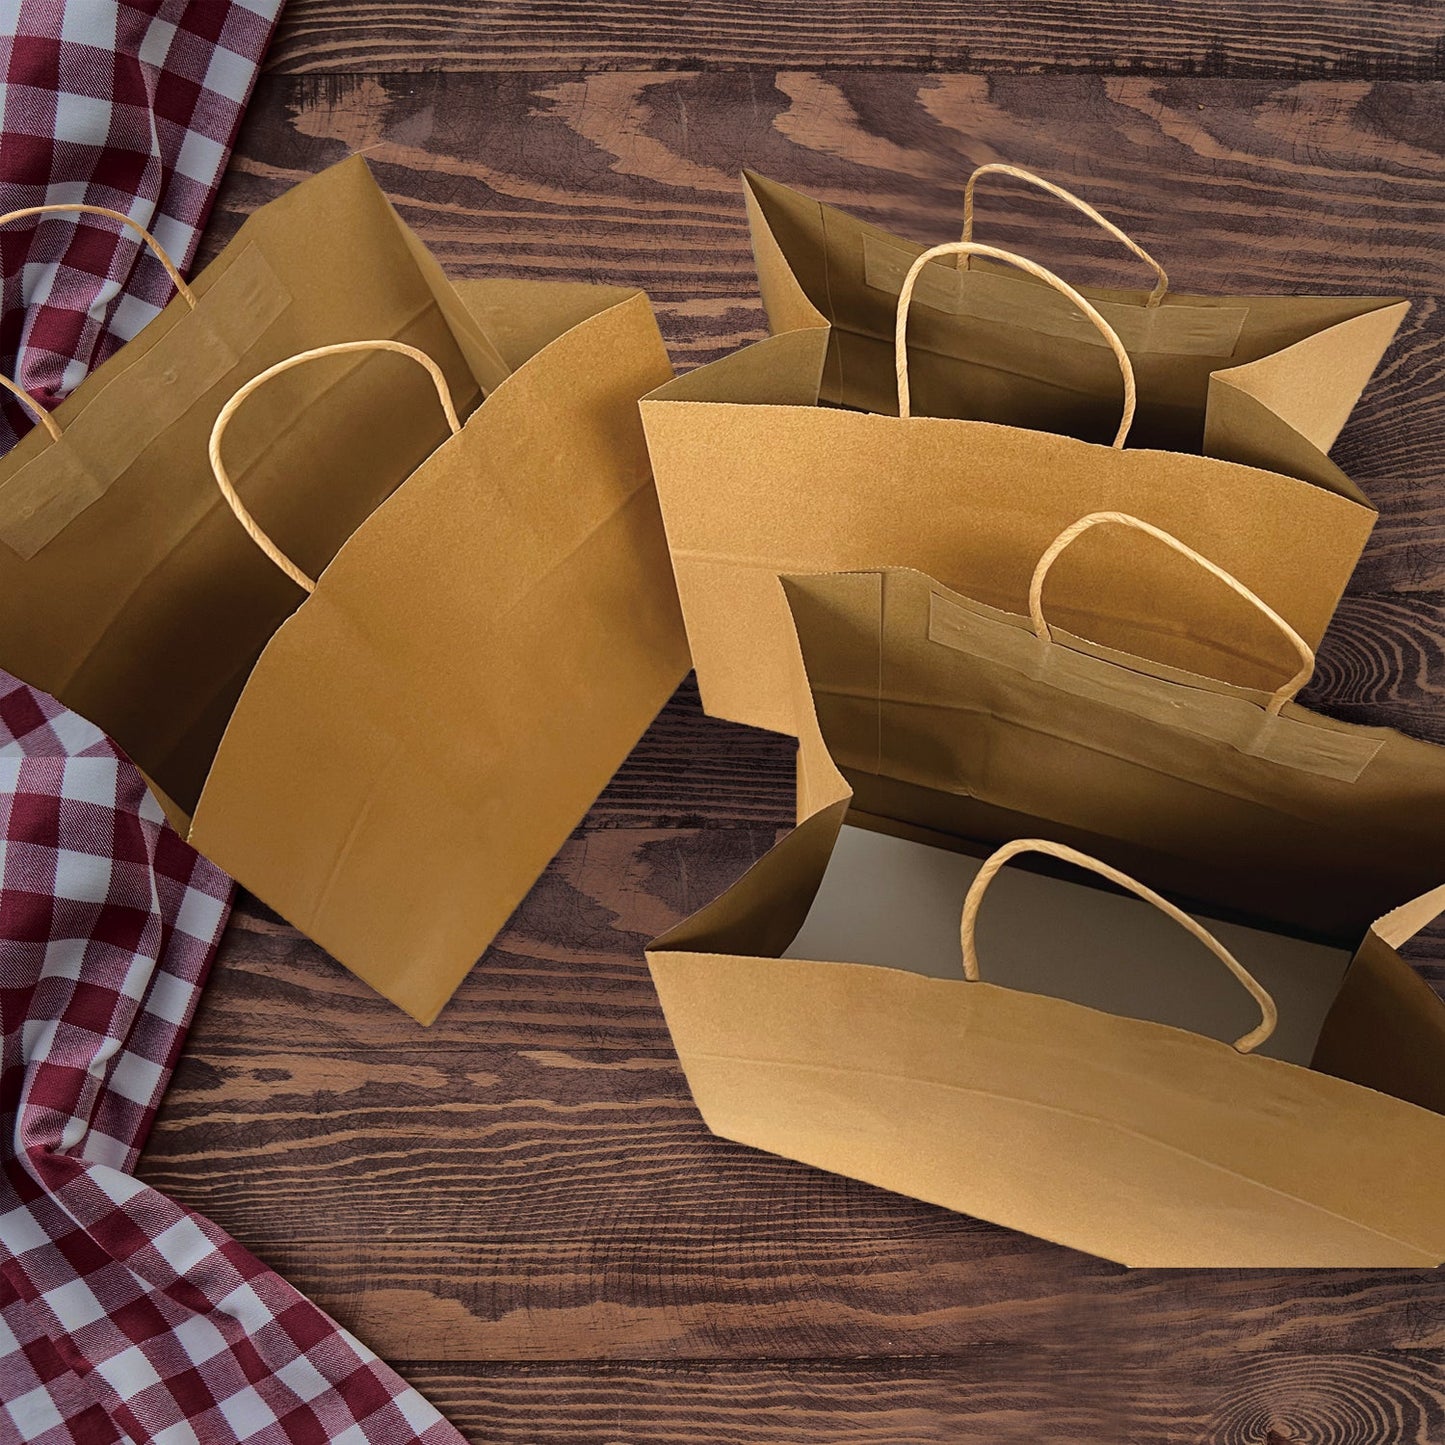 200pcs Take Out 13x8x13 inches Kraft Paper Bag Cardboard Insert with Twisted Handles, $0.43/pc